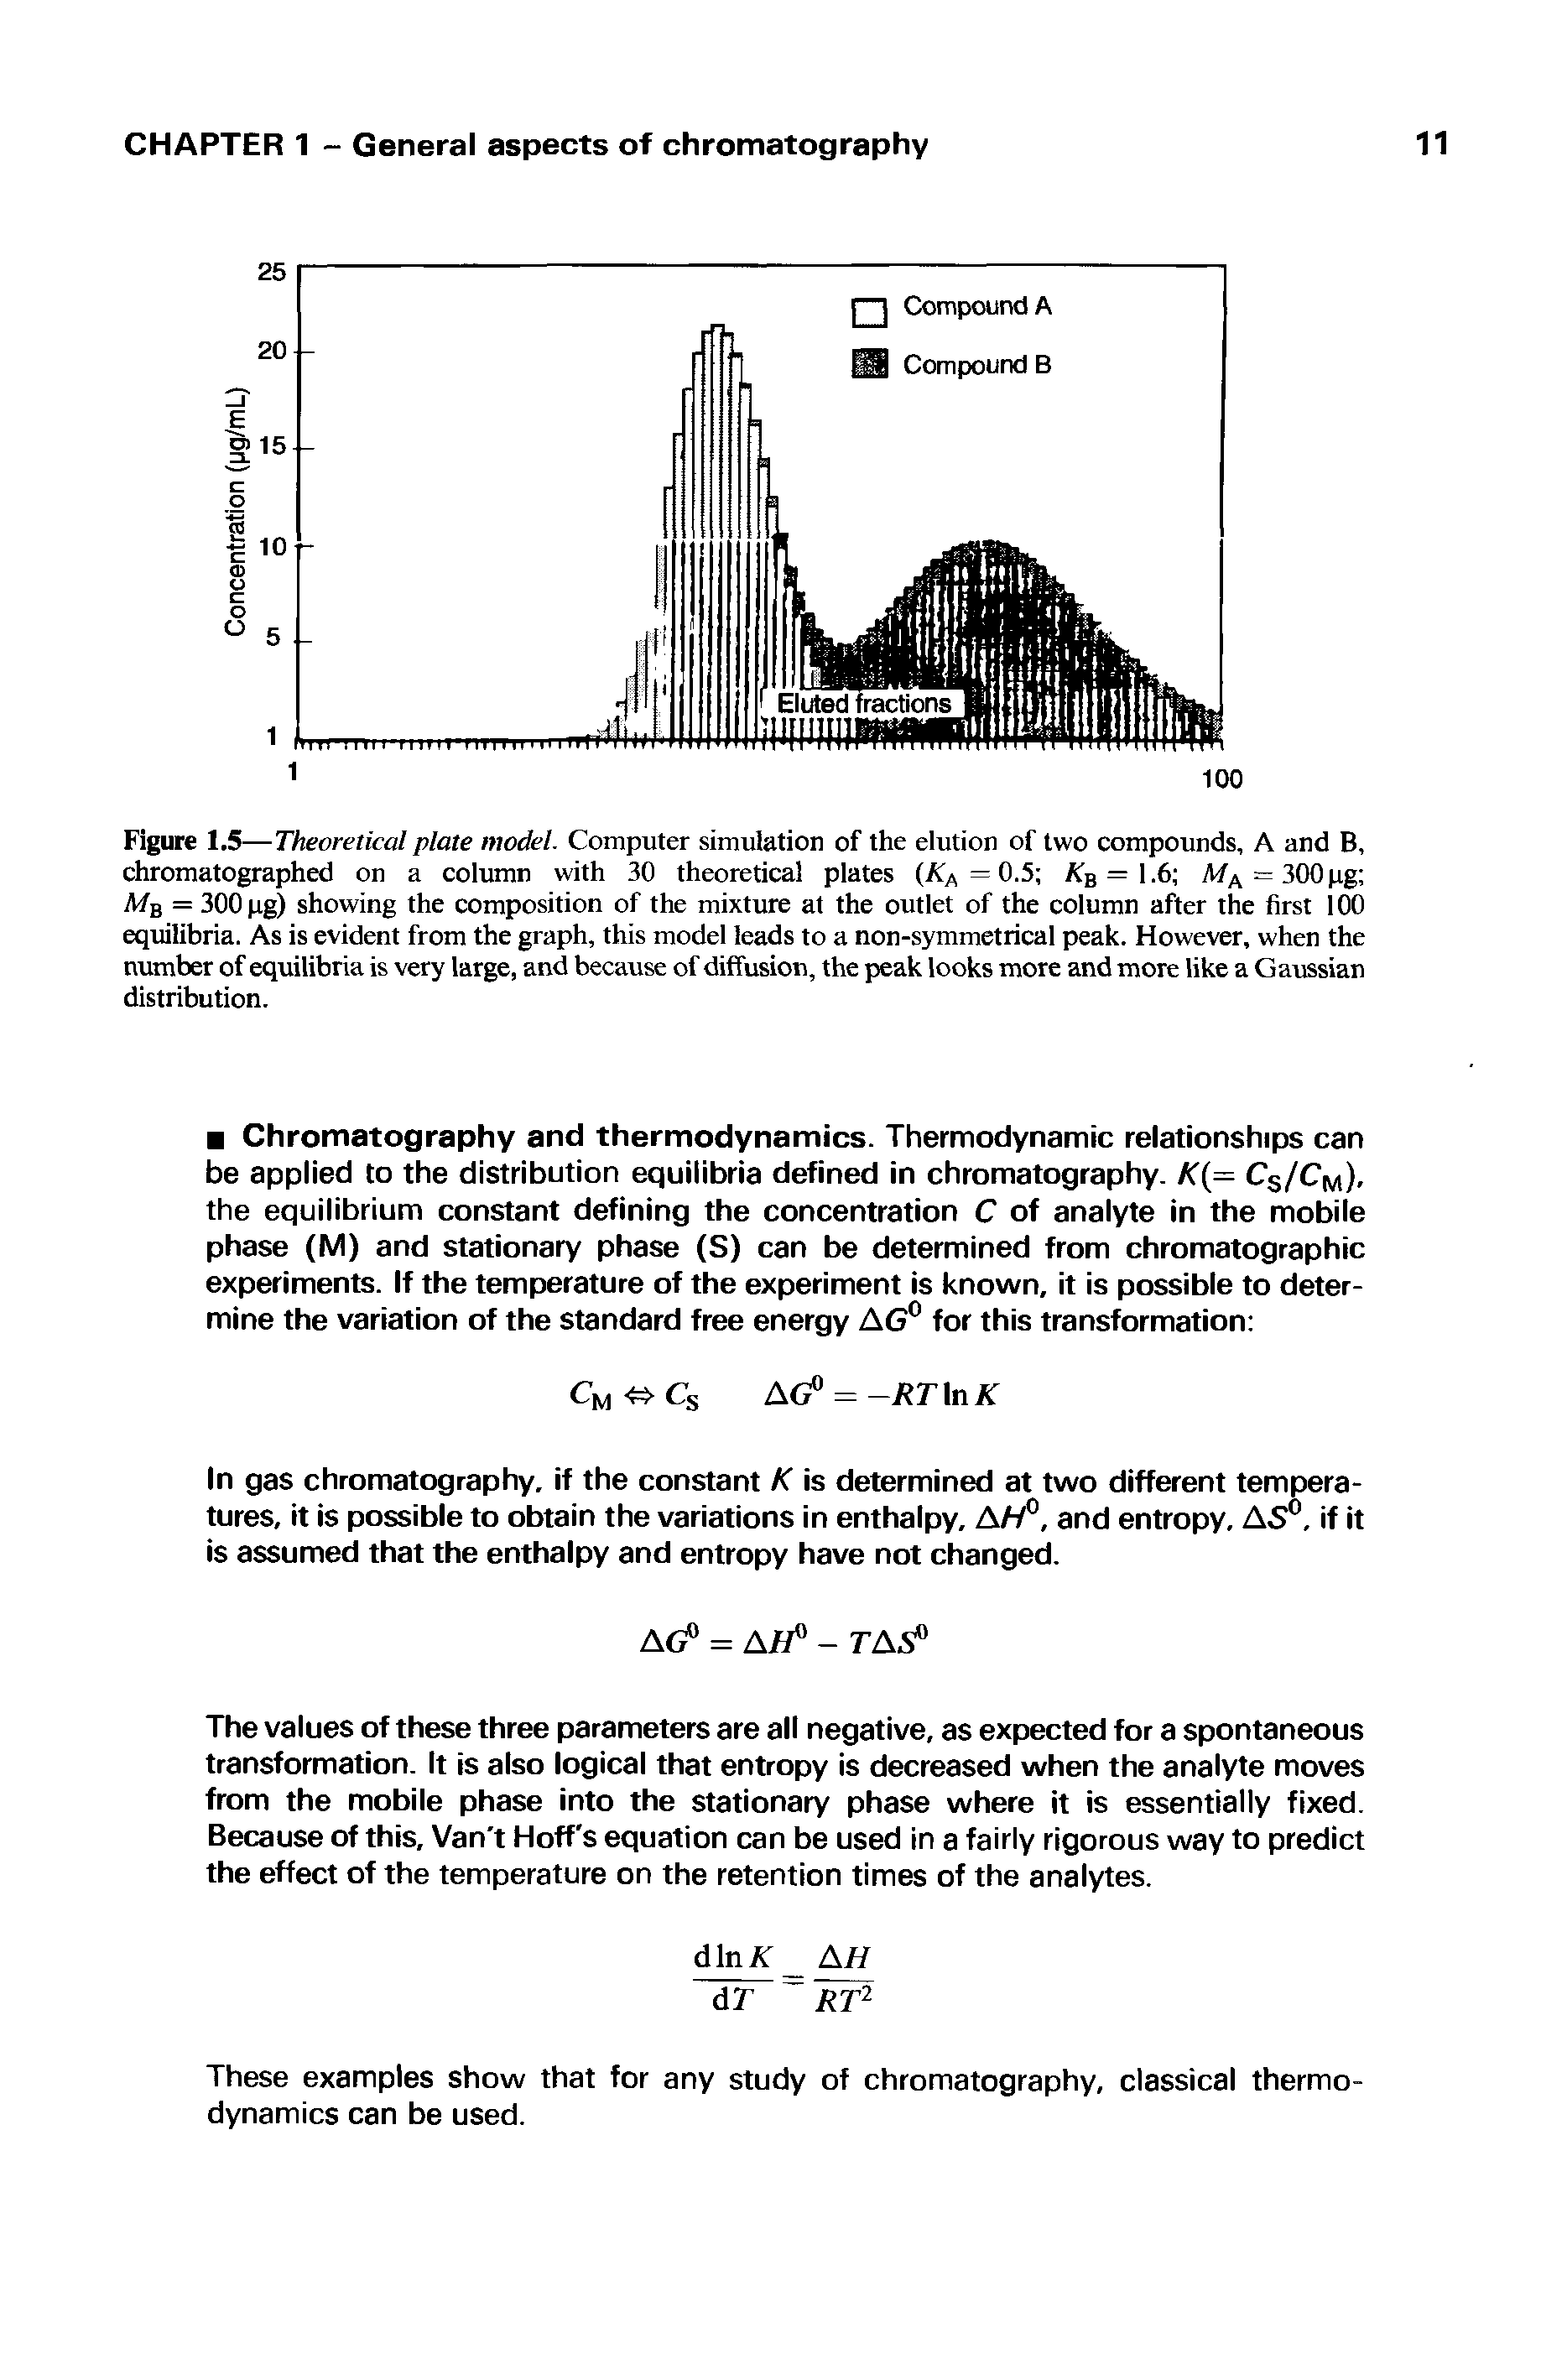 Figure 1.5—Theoretical plate model. Computer simulation of the elution of two compounds, A and B, chromatographed on a column with 30 theoretical plates (KA = 0.5 KB = 1.6 MA — 300 pg Mb = 300 pg) showing the composition of the mixture at the outlet of the column after the first 100 equilibria. As is evident from the graph, this model leads to a non-symmetrical peak. However, when the number of equilibria is very large, and because of diffusion, the peak looks more and more like a Gaussian distribution.